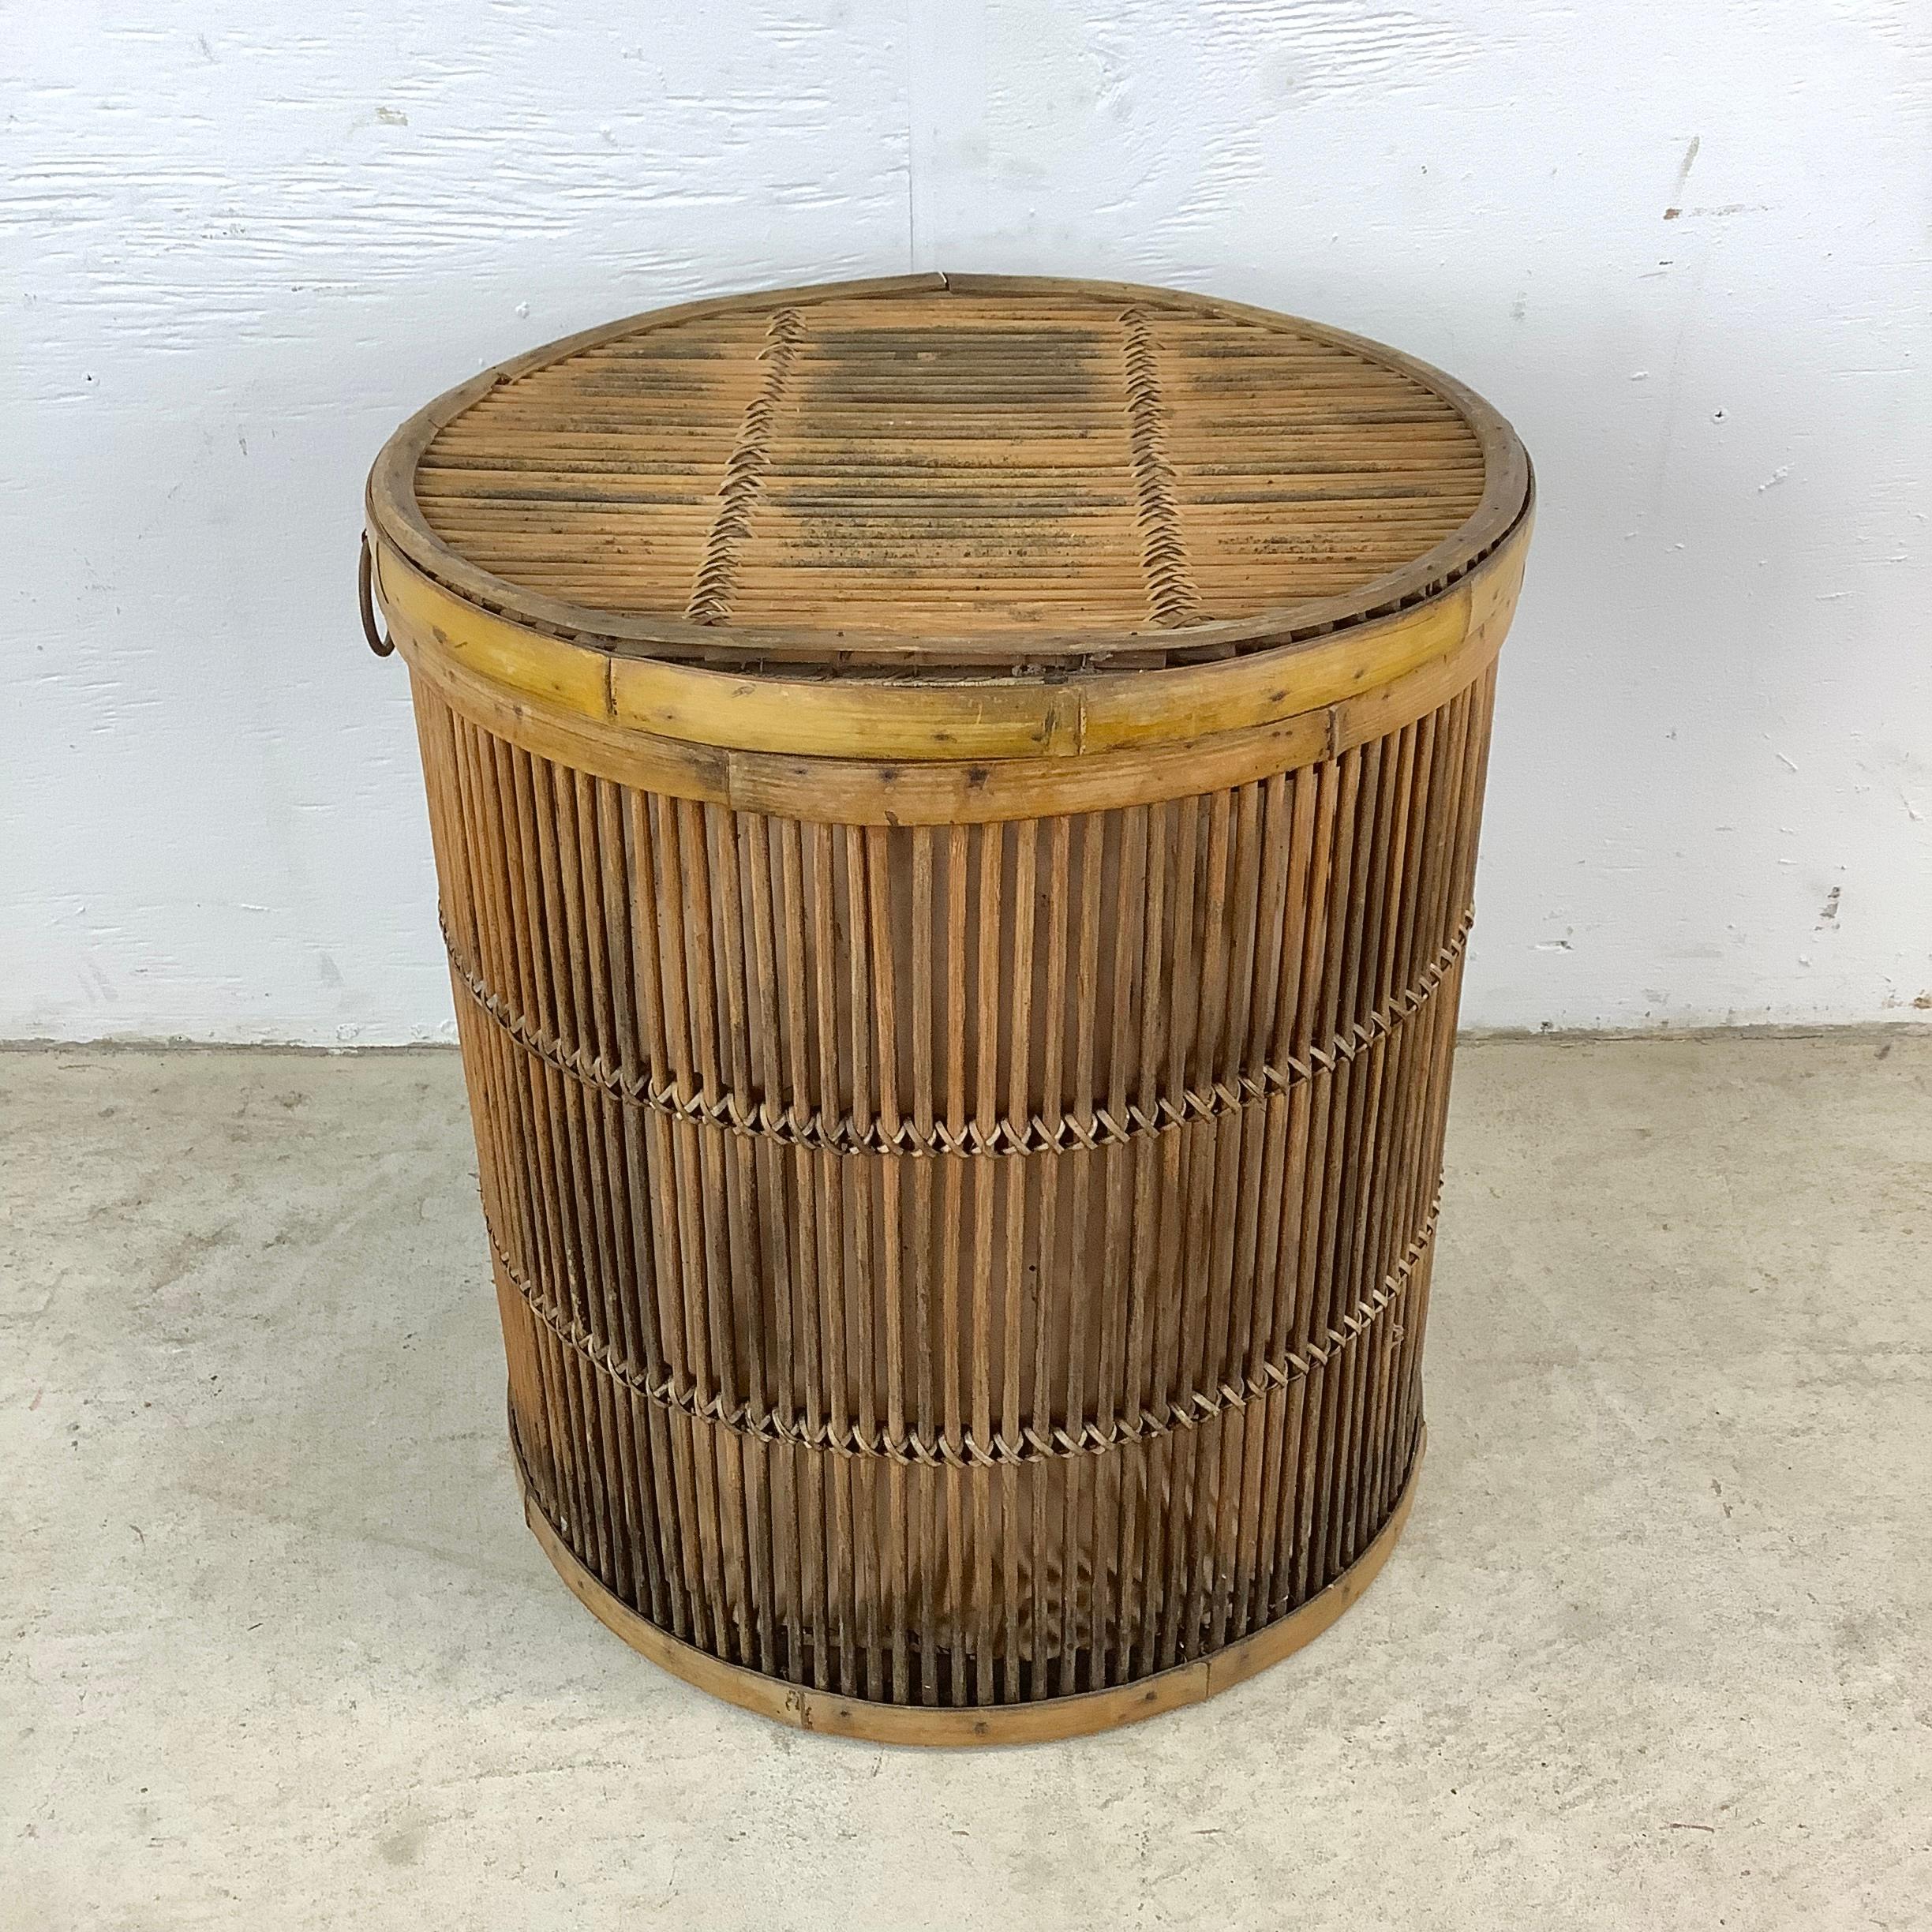 Embrace the allure of vintage elegance with this exquisite vintage pencil reed basket, a unique piece that combines functionality with classic design. This handcrafted basket comes complete with a snug-fitting lid, making it a perfect blend of